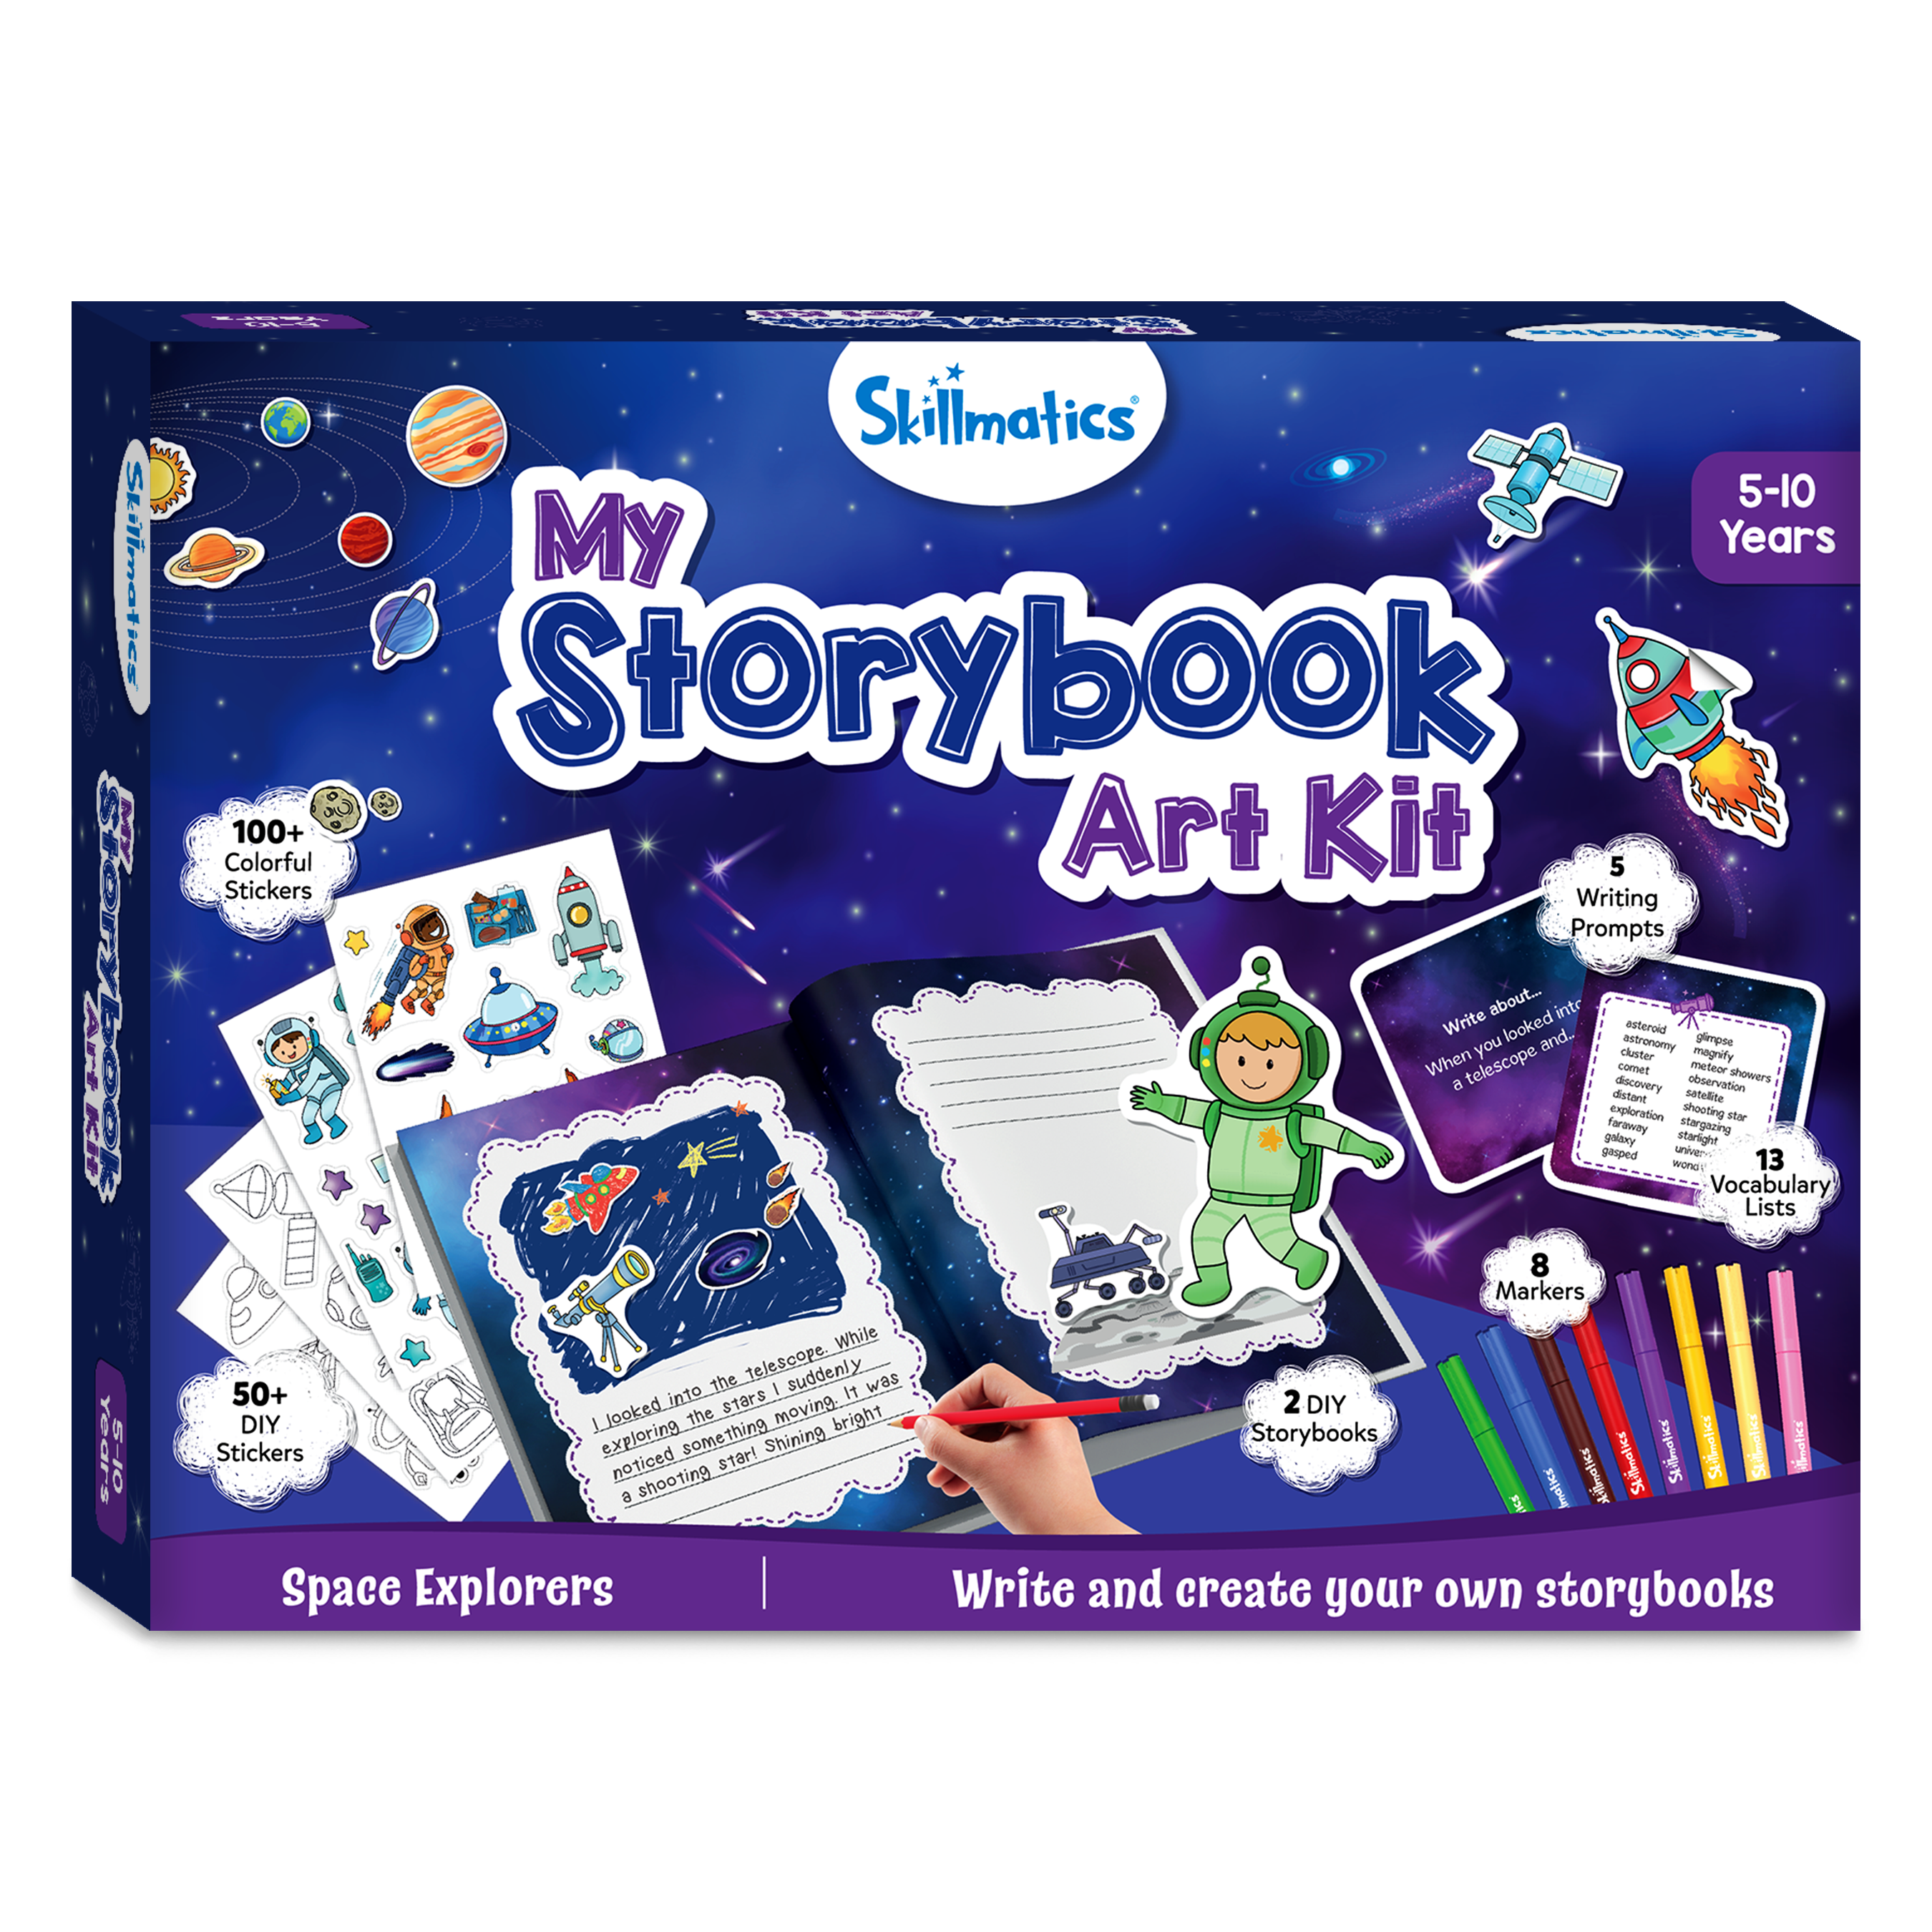 Skillmatics Storybook Art Kit - Space Explorers Art Kit for Kids, Write & Create Storybooks, Creative Activity for Boys & Girls, DIY Kit, 150+ Stickers, Gifts for Ages 5, 6, 7, 8, 9, 10